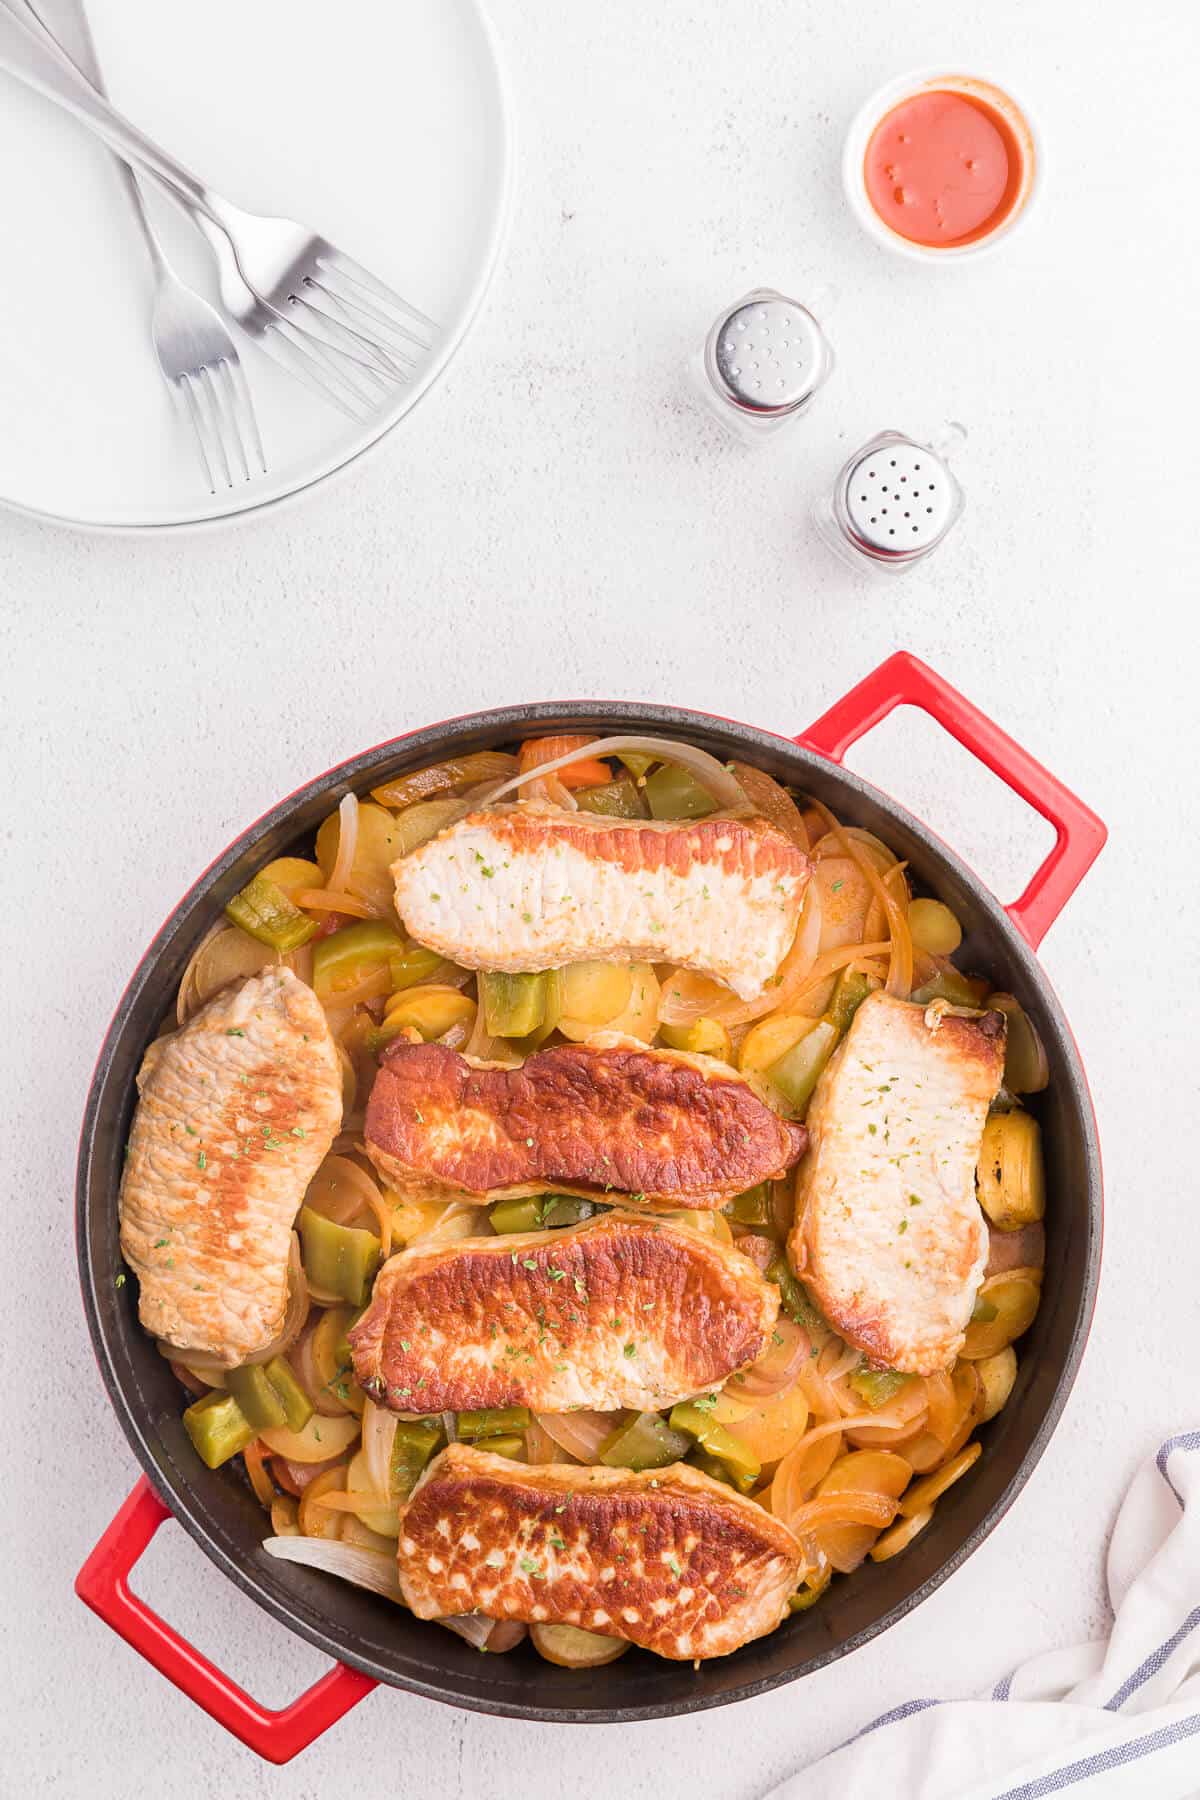 Pork Chop Skillet Dinner Recipe - A simple and delicious one-pan meal! Pork chops are cooked to perfection with potatoes, carrots, onions and green pepper in a tomato sauce with a kick.